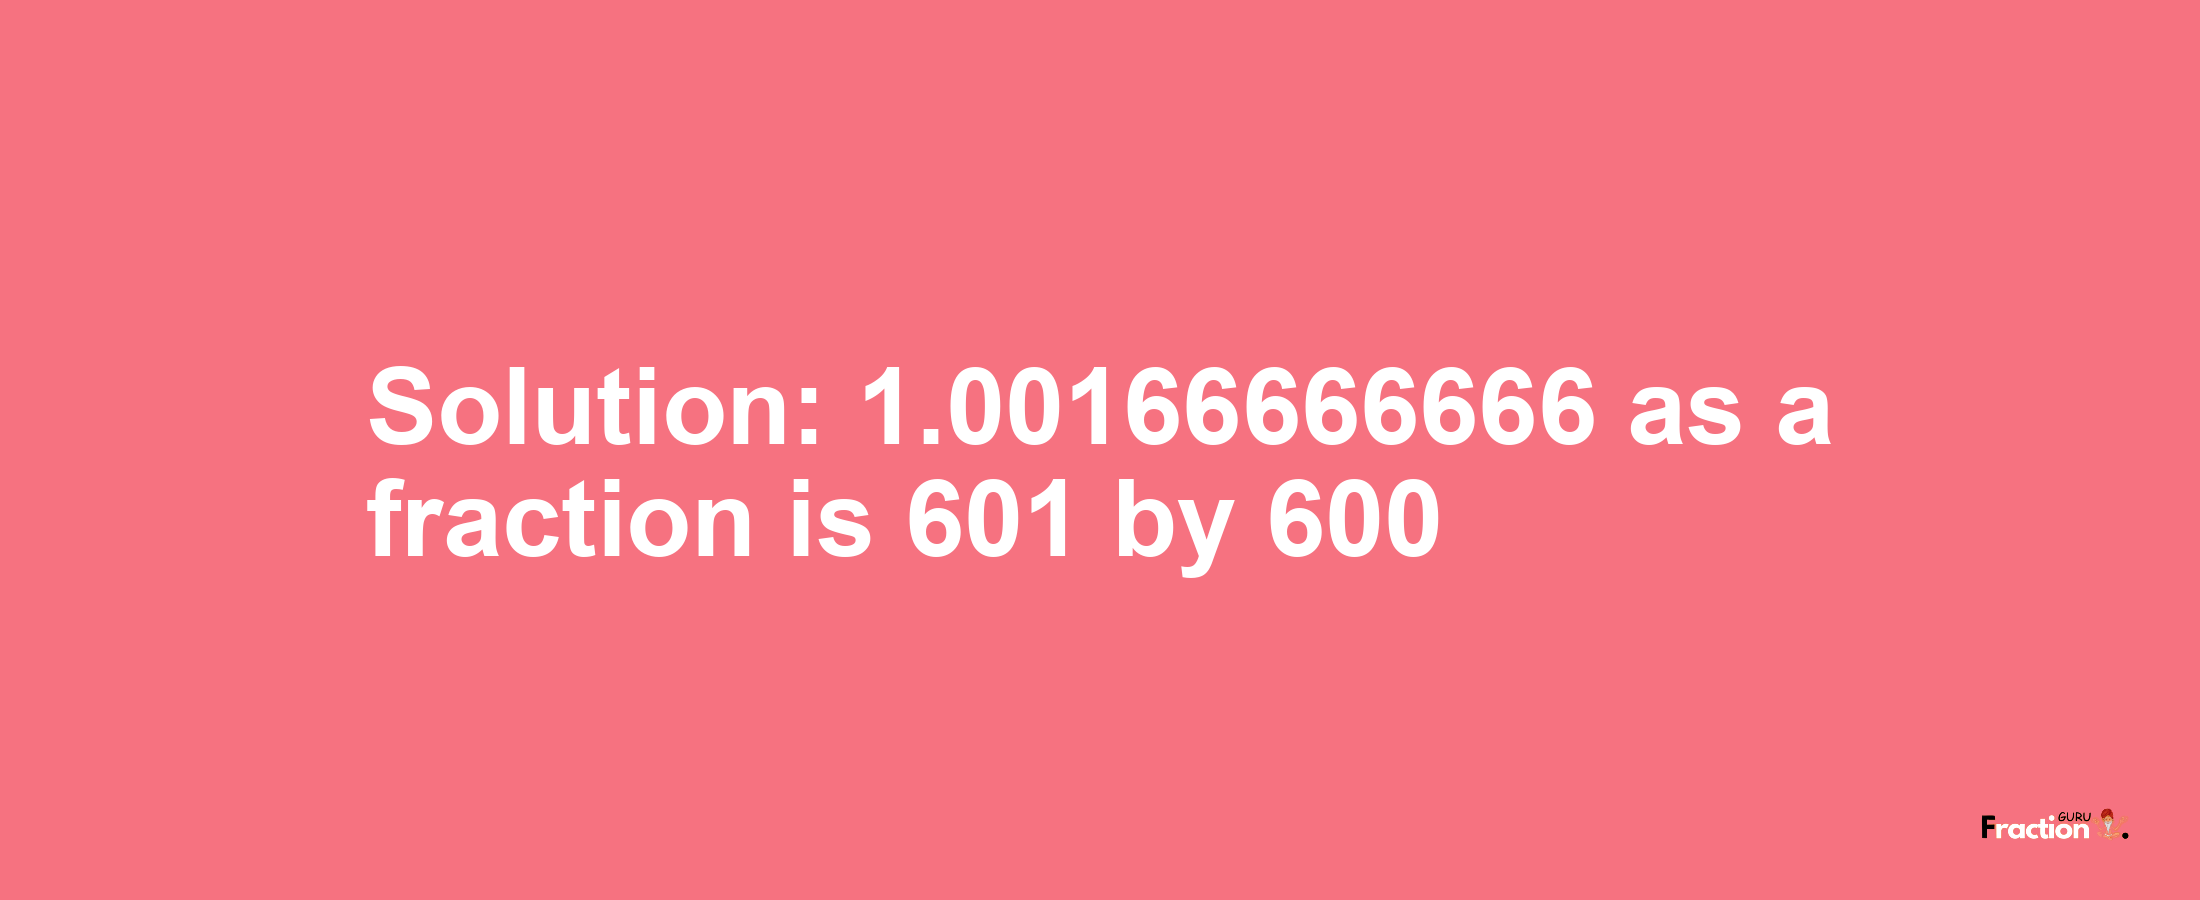 Solution:1.00166666666 as a fraction is 601/600